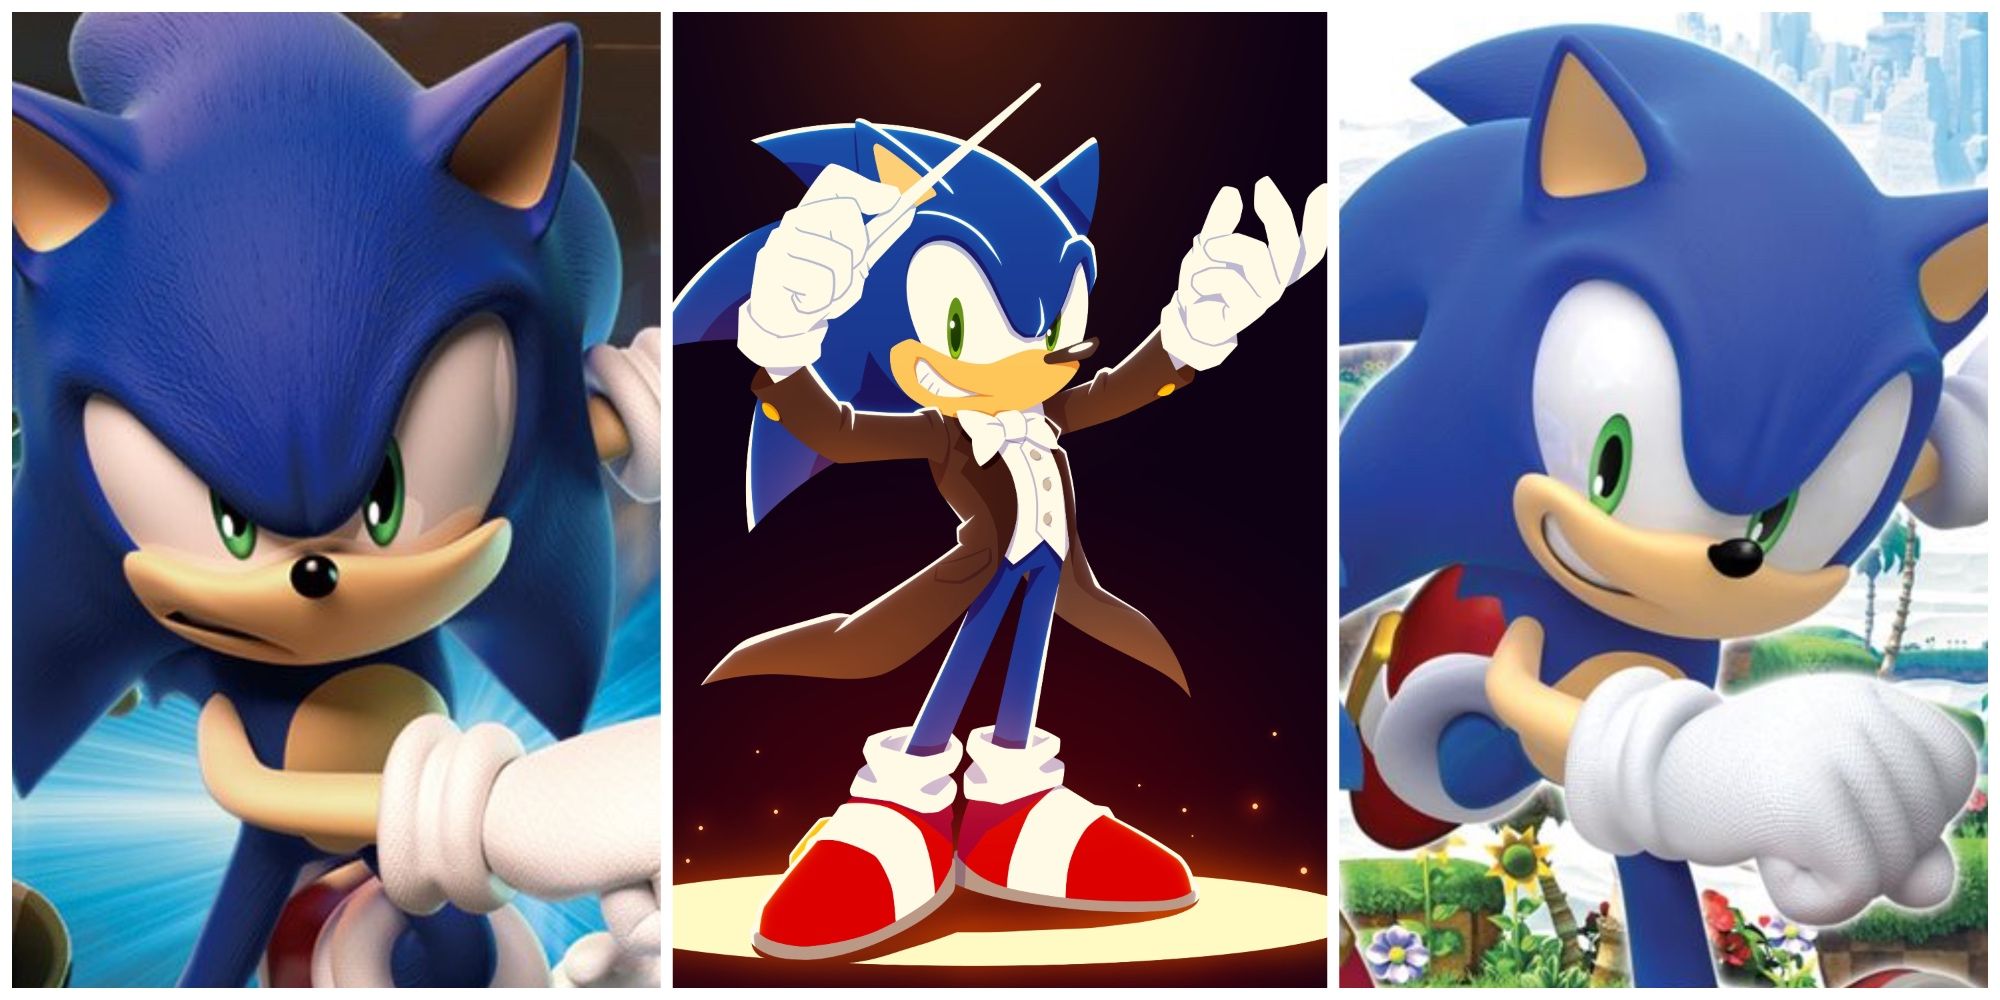 3 pictures of Sonic the Hedgehog from different games and promotional material